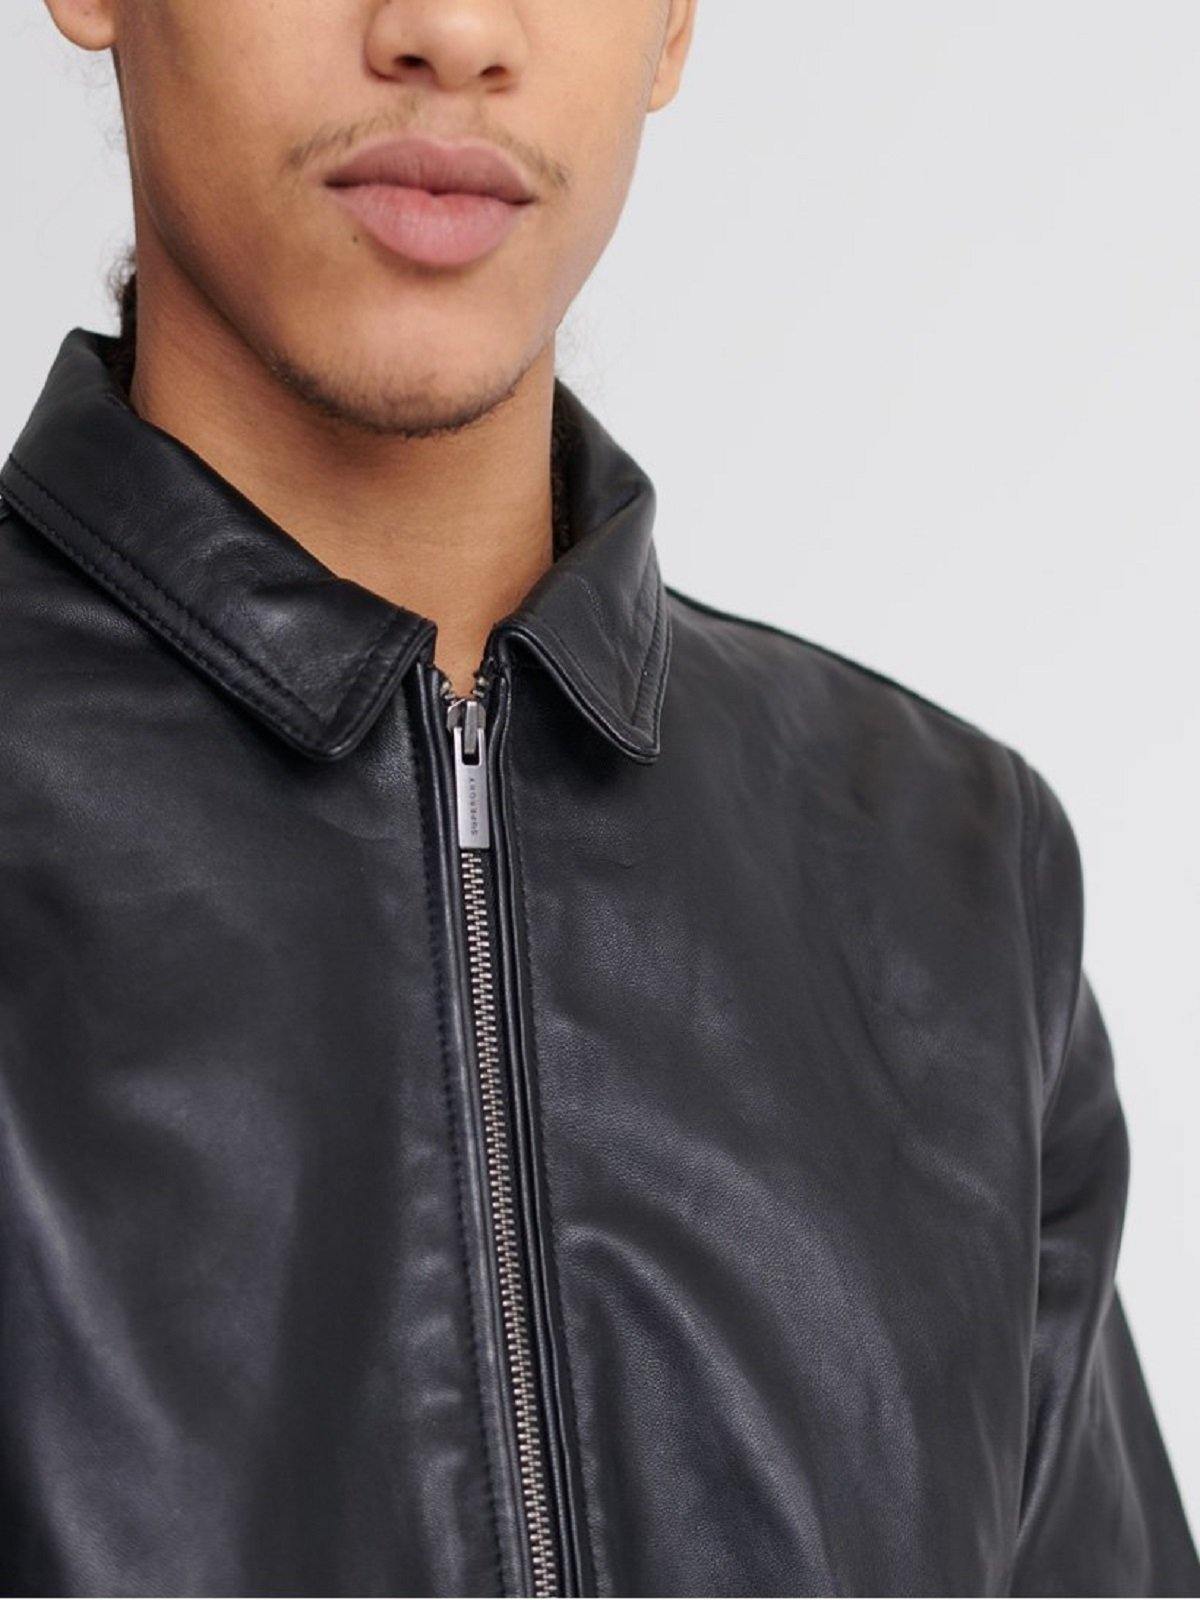 Casual Leather Jacket For Men - Wiseleather